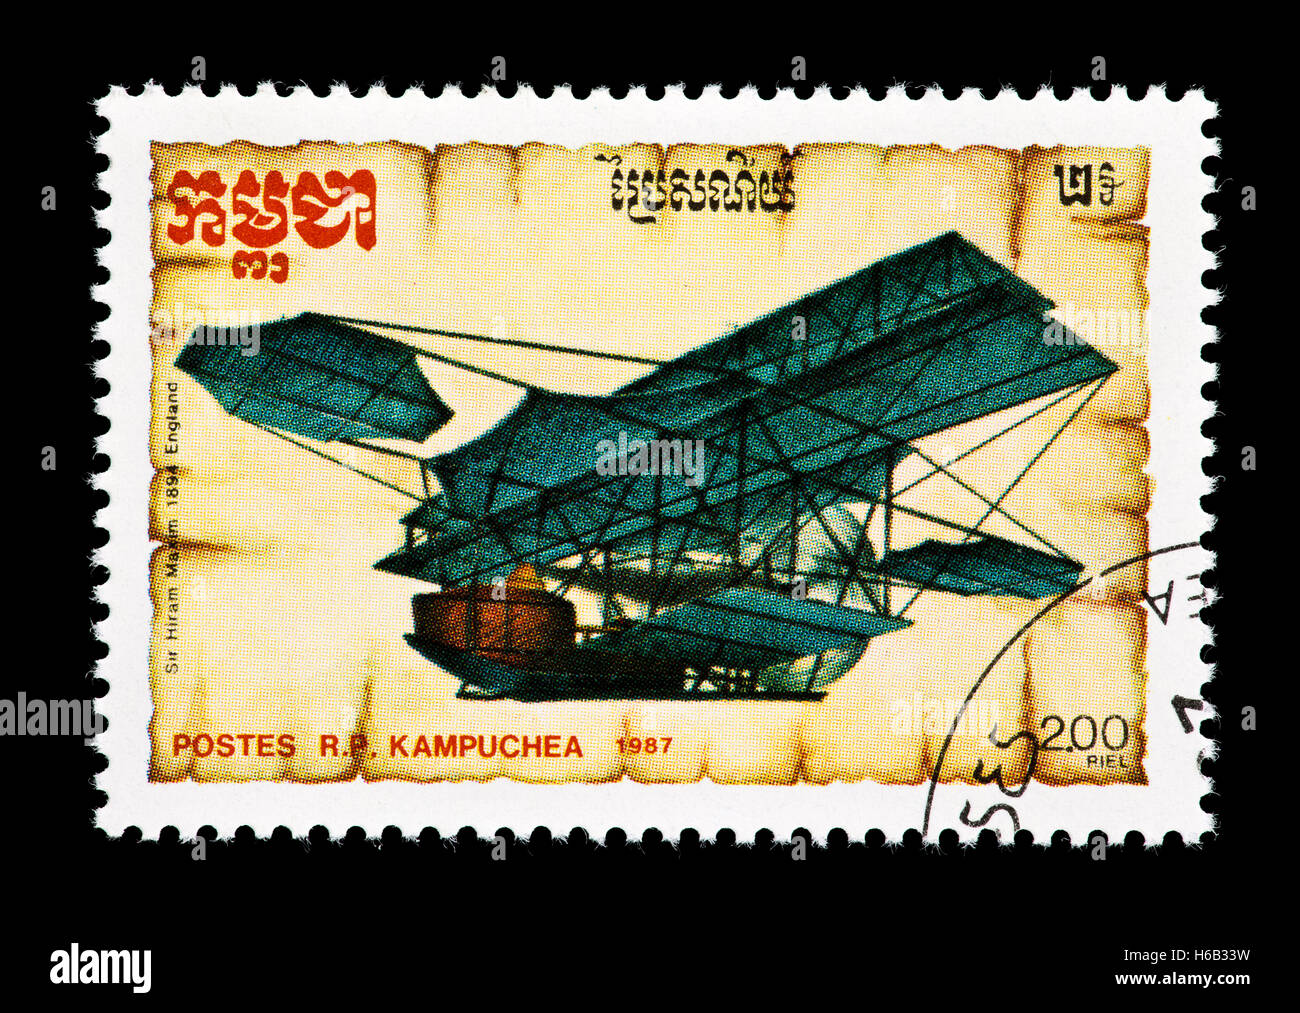 Postage stamp from Cambodia (Kampuchea) depicting an early aircraft design by Sir Hiram Maxim, 1894 England. Stock Photo